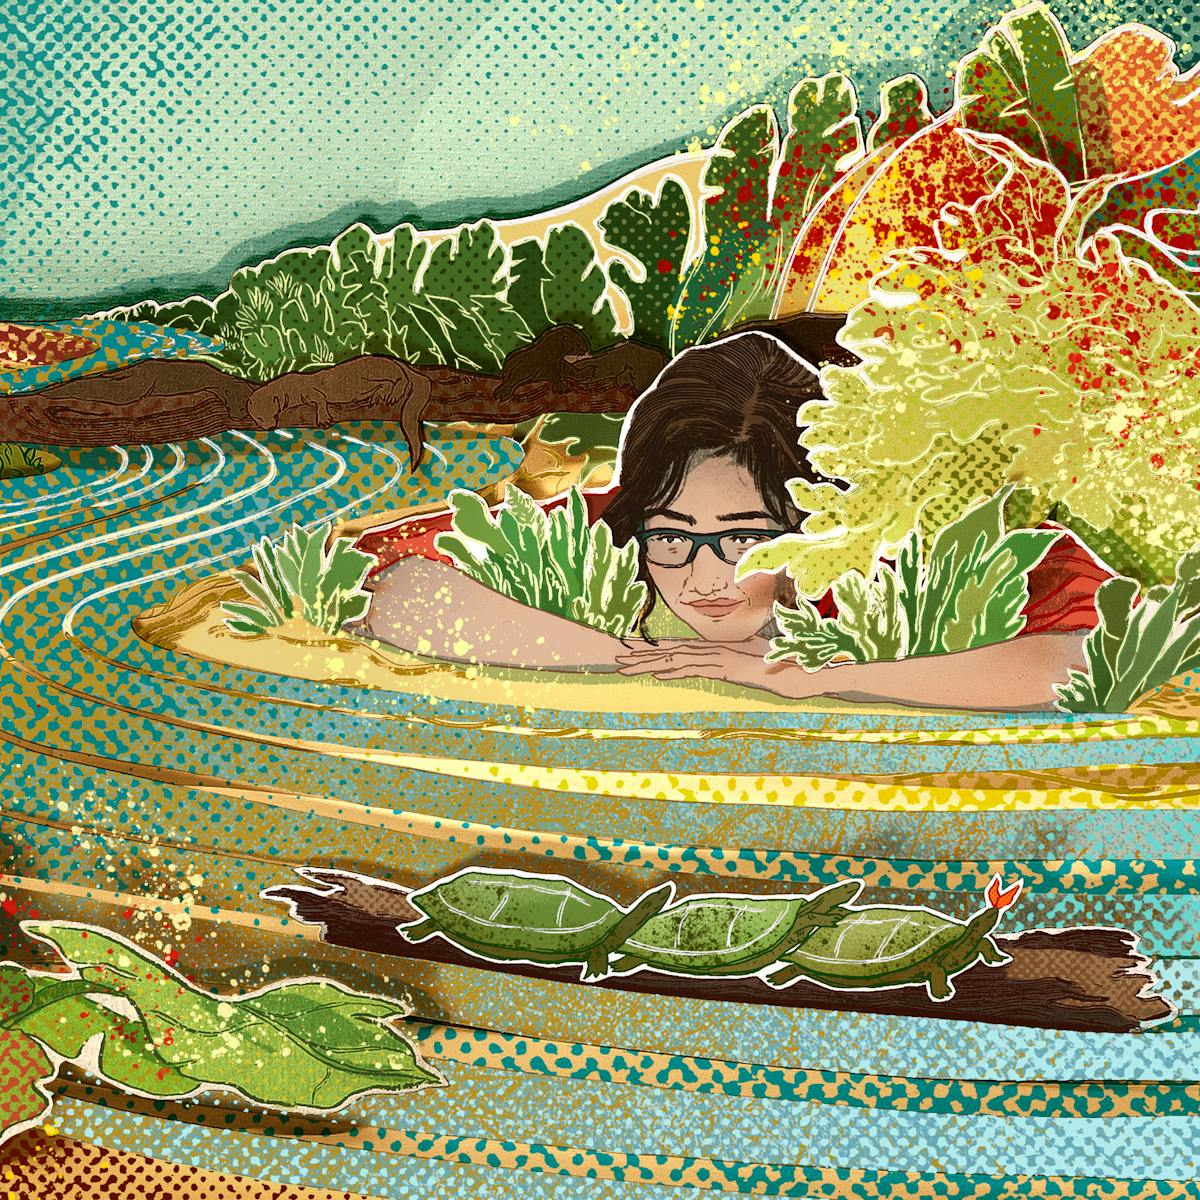 Photograph of a papercut 3D artwork. The image shows a meandering mottled blue and yellow river with white and gold brush strokes indicating the river’s curvature. Surrounding the different bends of the river are plants and shrubbery of various shades of green with red and yellow paint splatters. There is a brunette girl wearing glasses resting with her head in her hands near the river bank.  Four brown otters are shown resting and playing on a branch outstretched across the river. Three tortoises are piled on top of a floating log, travelling downstream. 